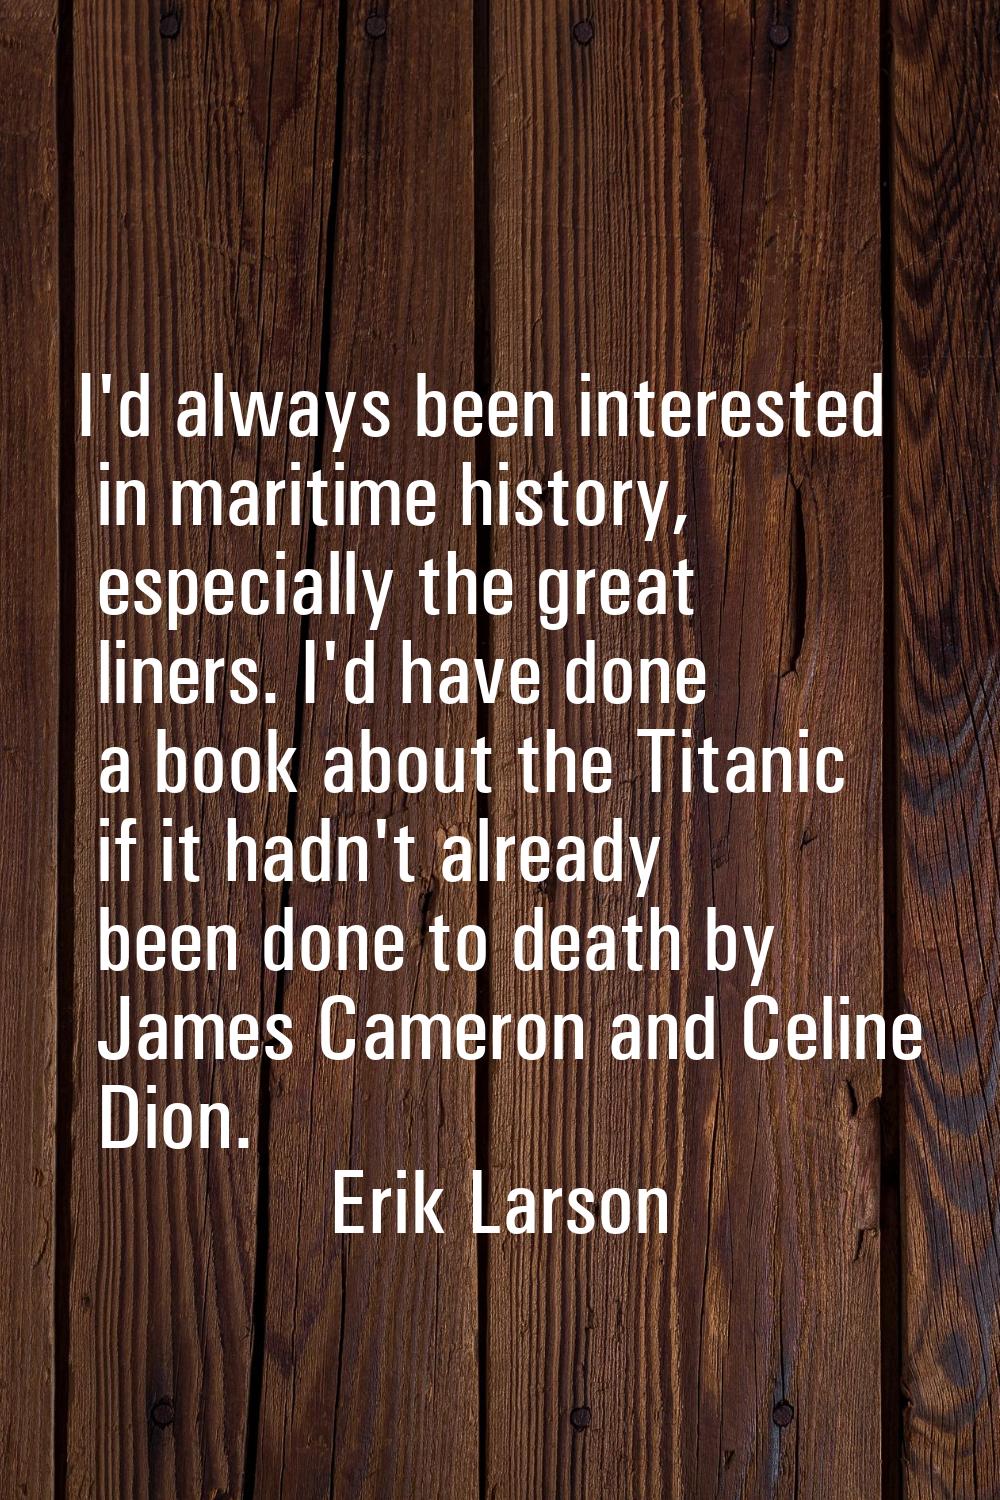 I'd always been interested in maritime history, especially the great liners. I'd have done a book a